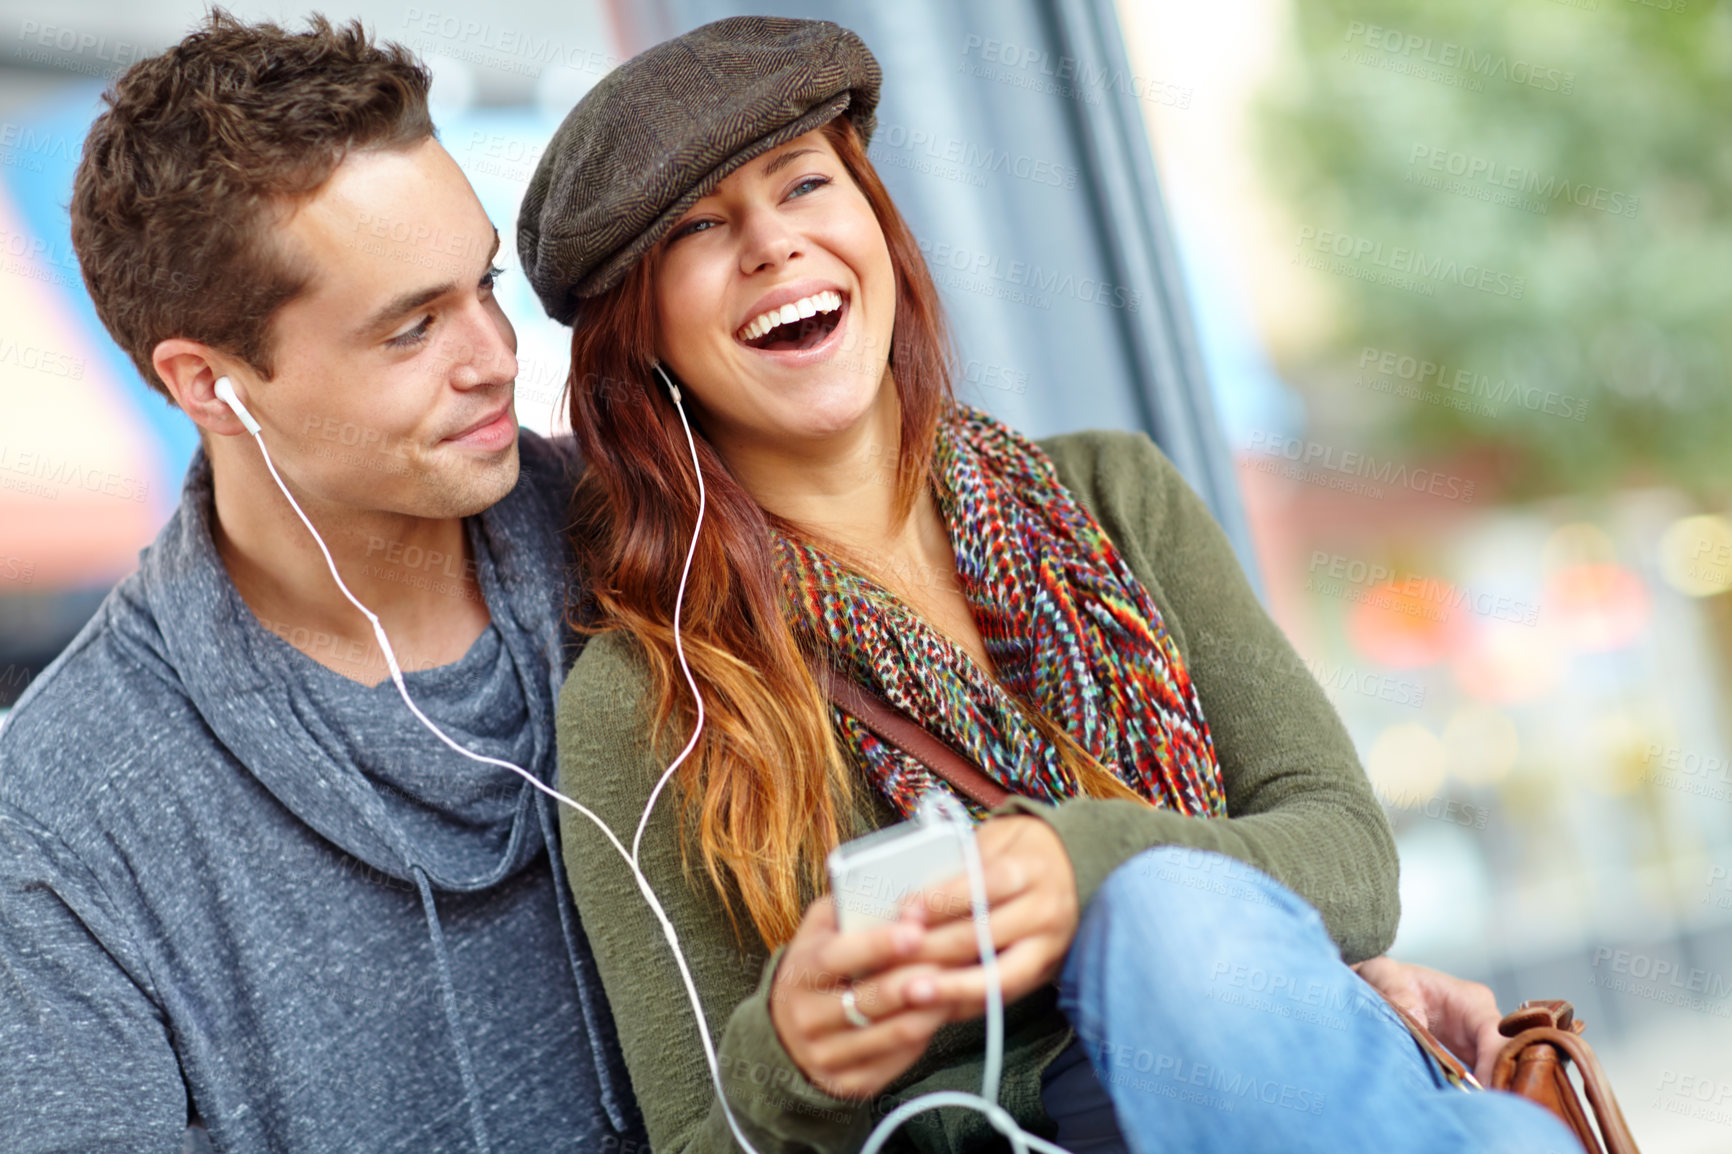 Buy stock photo A pretty girl sharing her earphones with her boyfriend as they listen to music from her phone